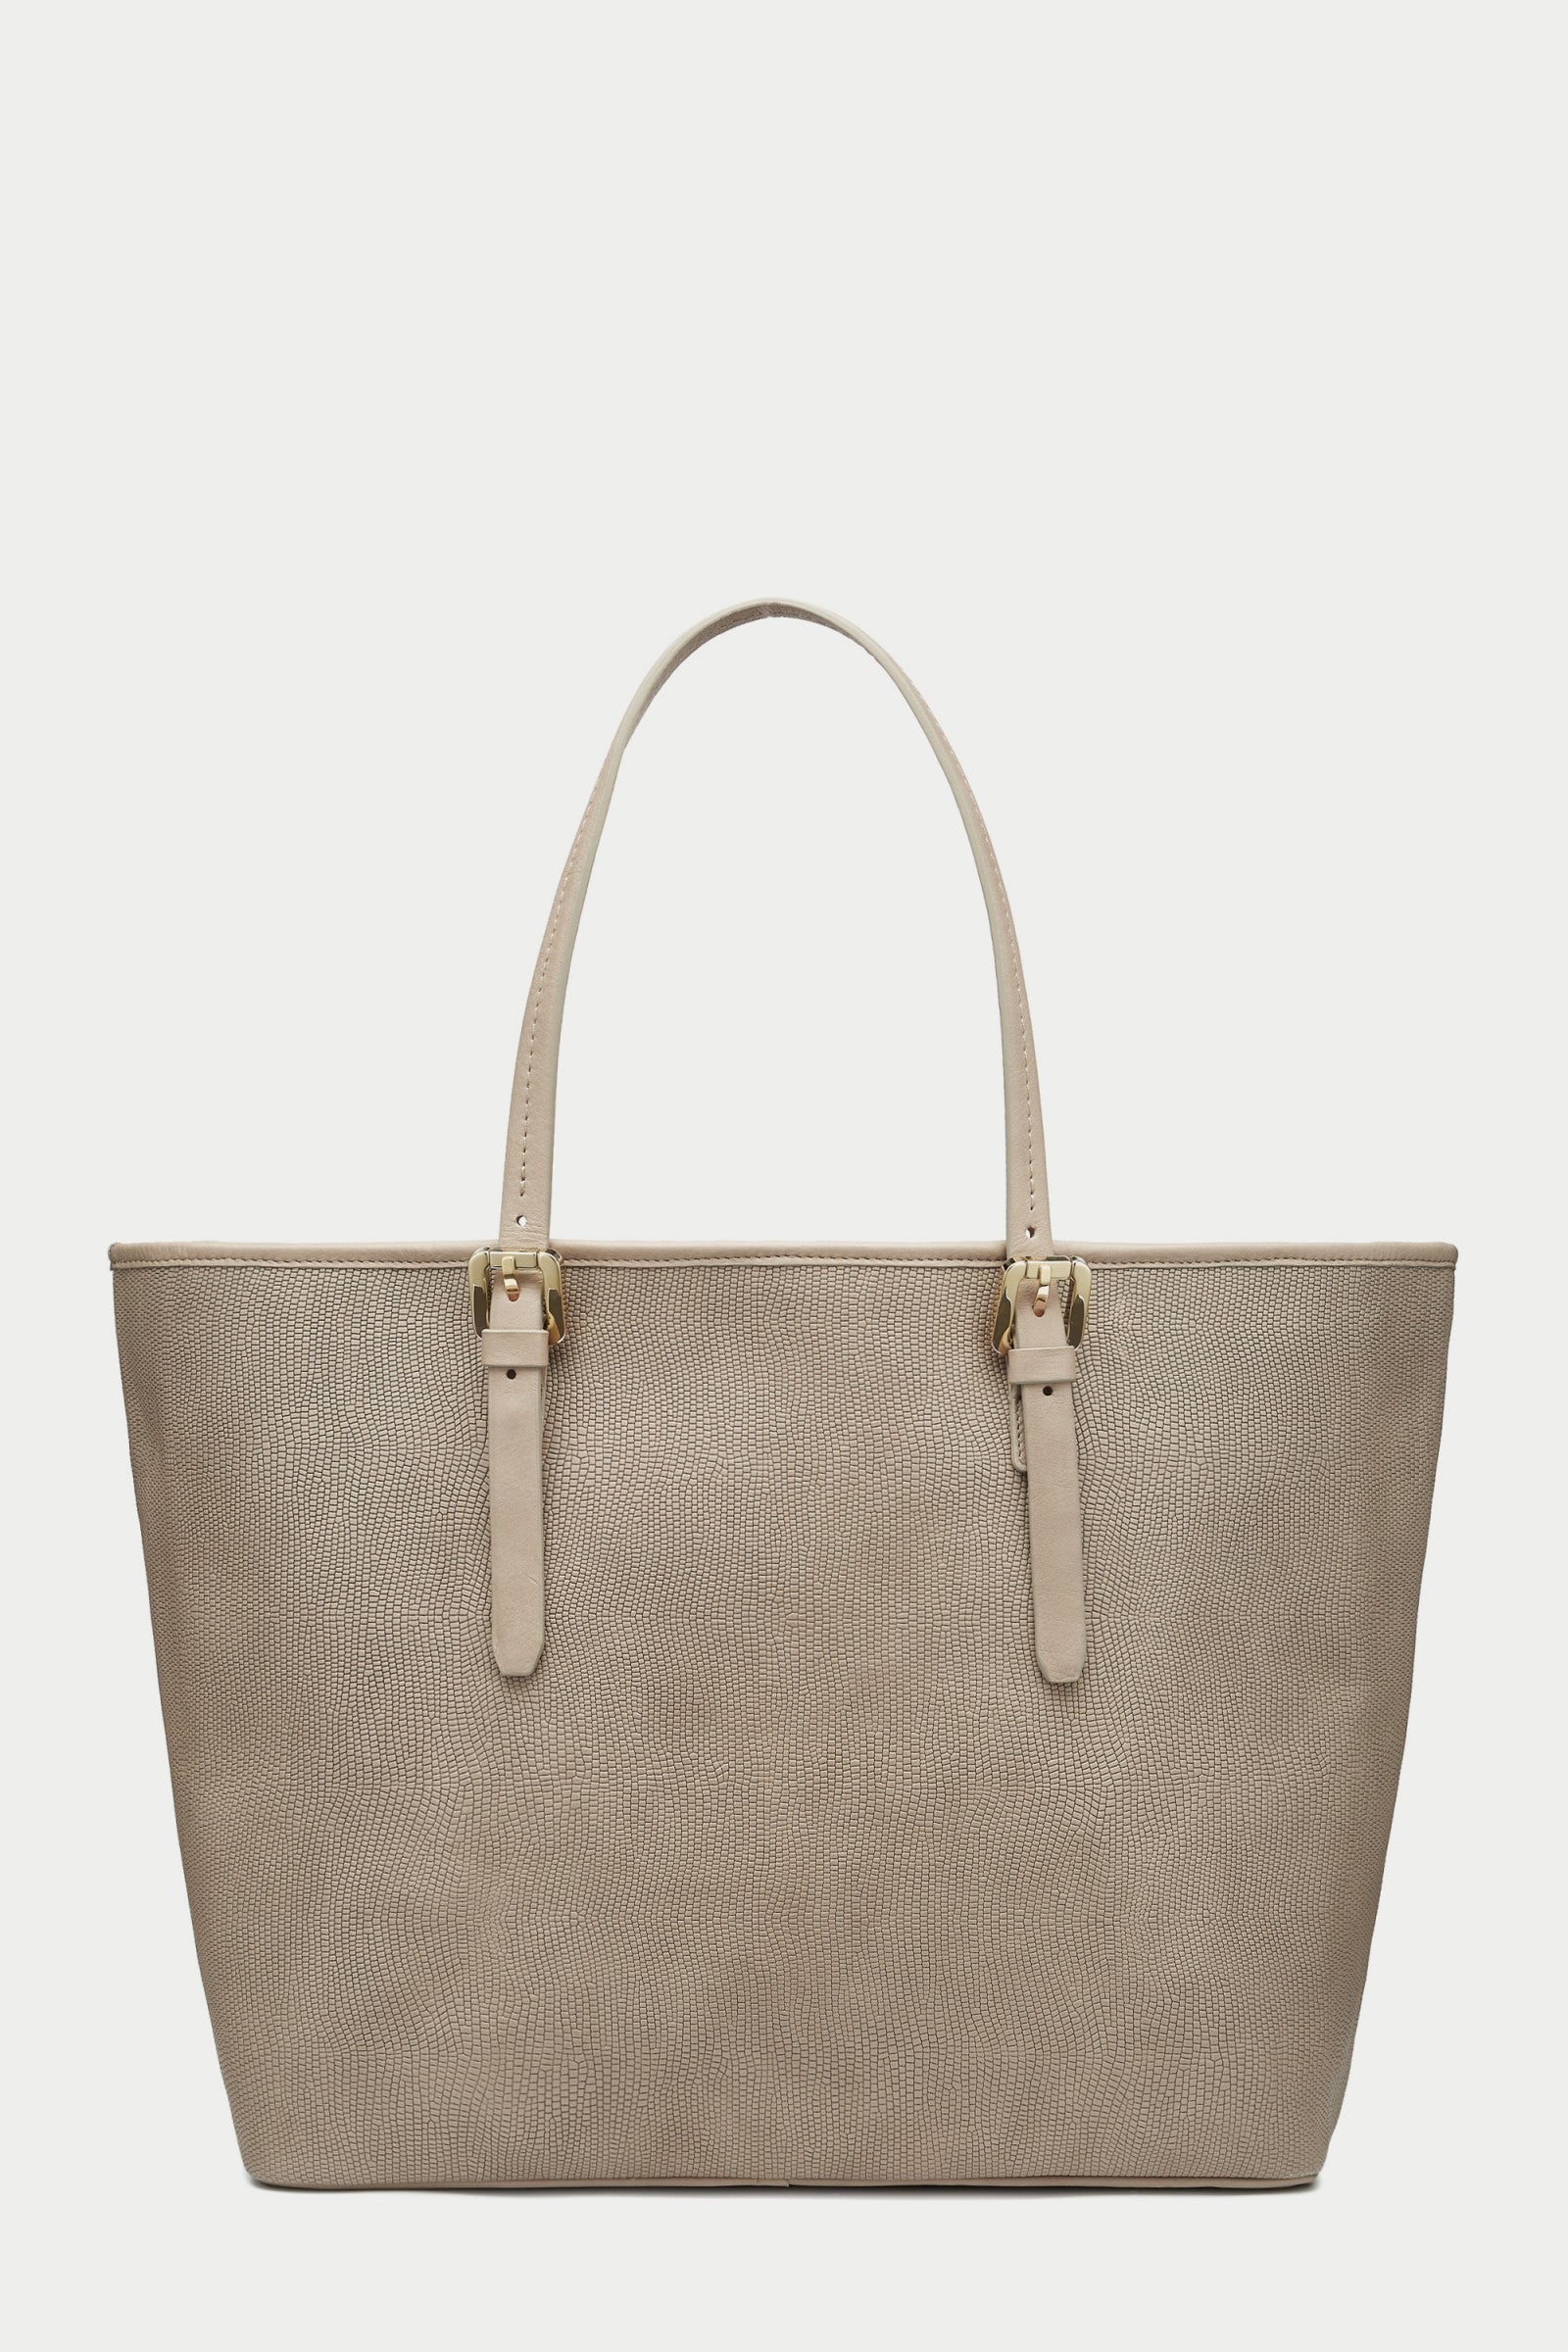 Kennedy CRYSTAL PINK Leather tote bag